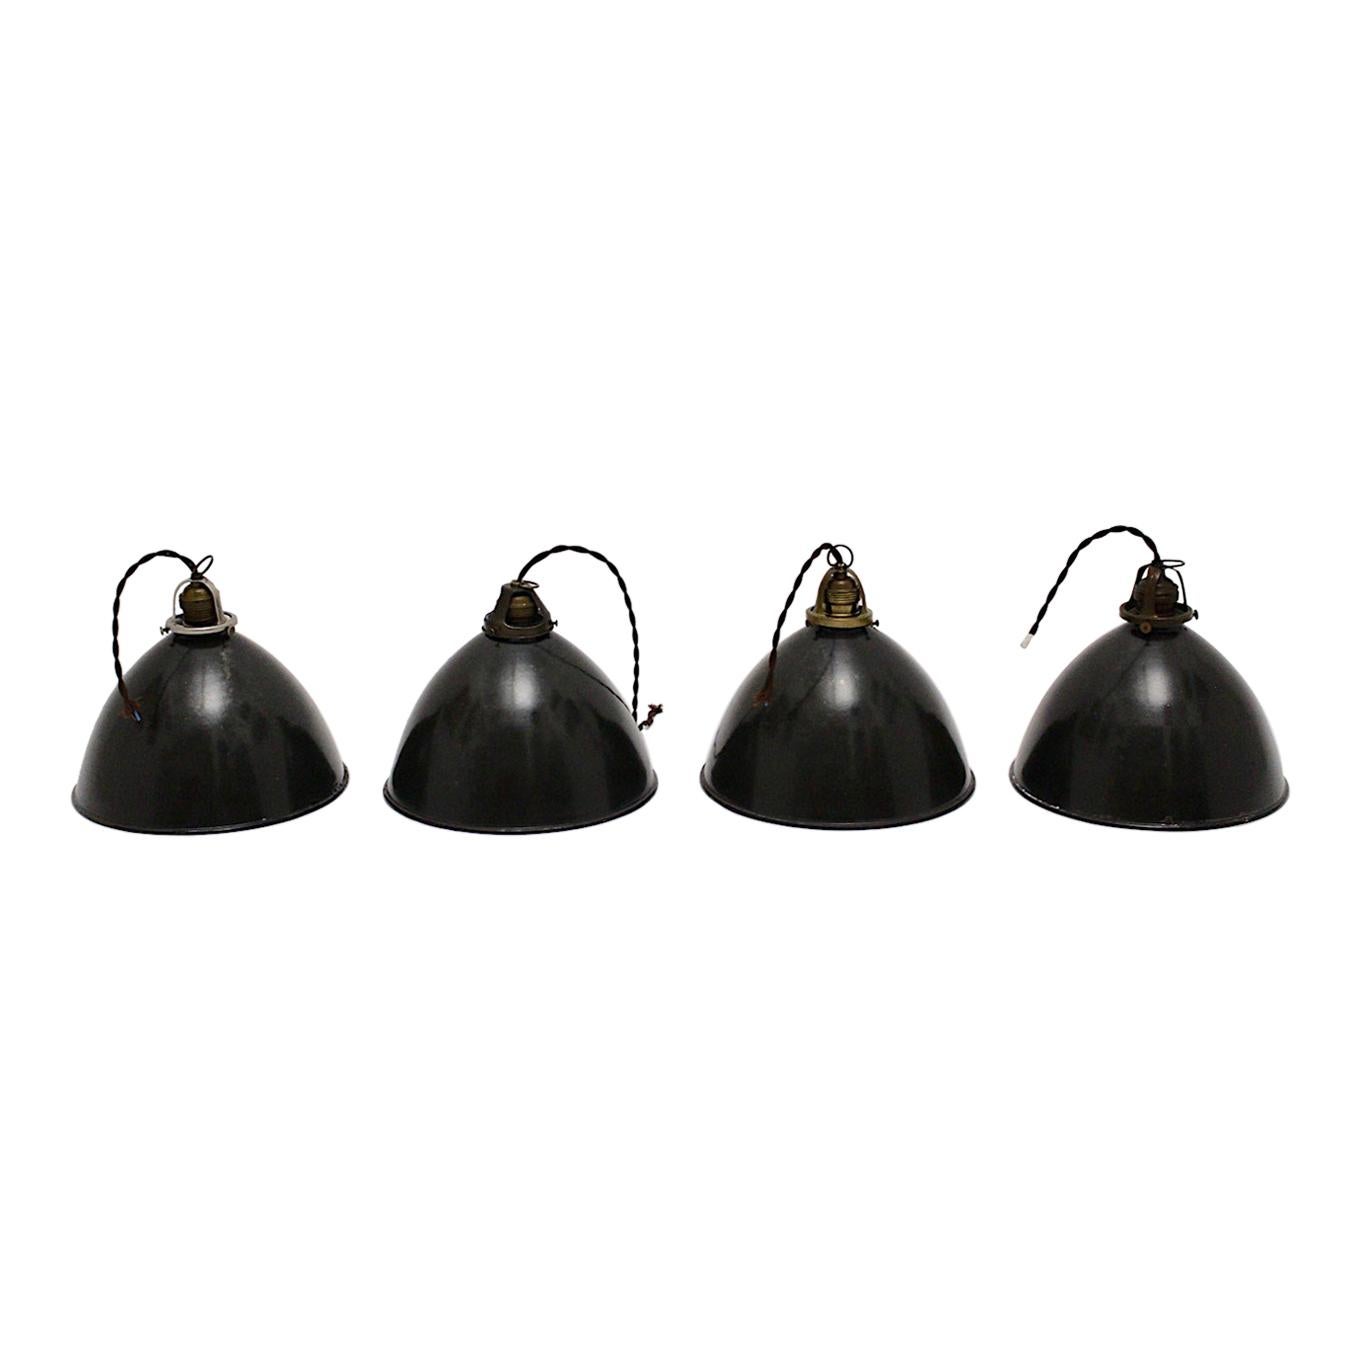 Bauhaus Black and White Vintage Set of four Email Hanging Lamps, 1920s, Germany For Sale